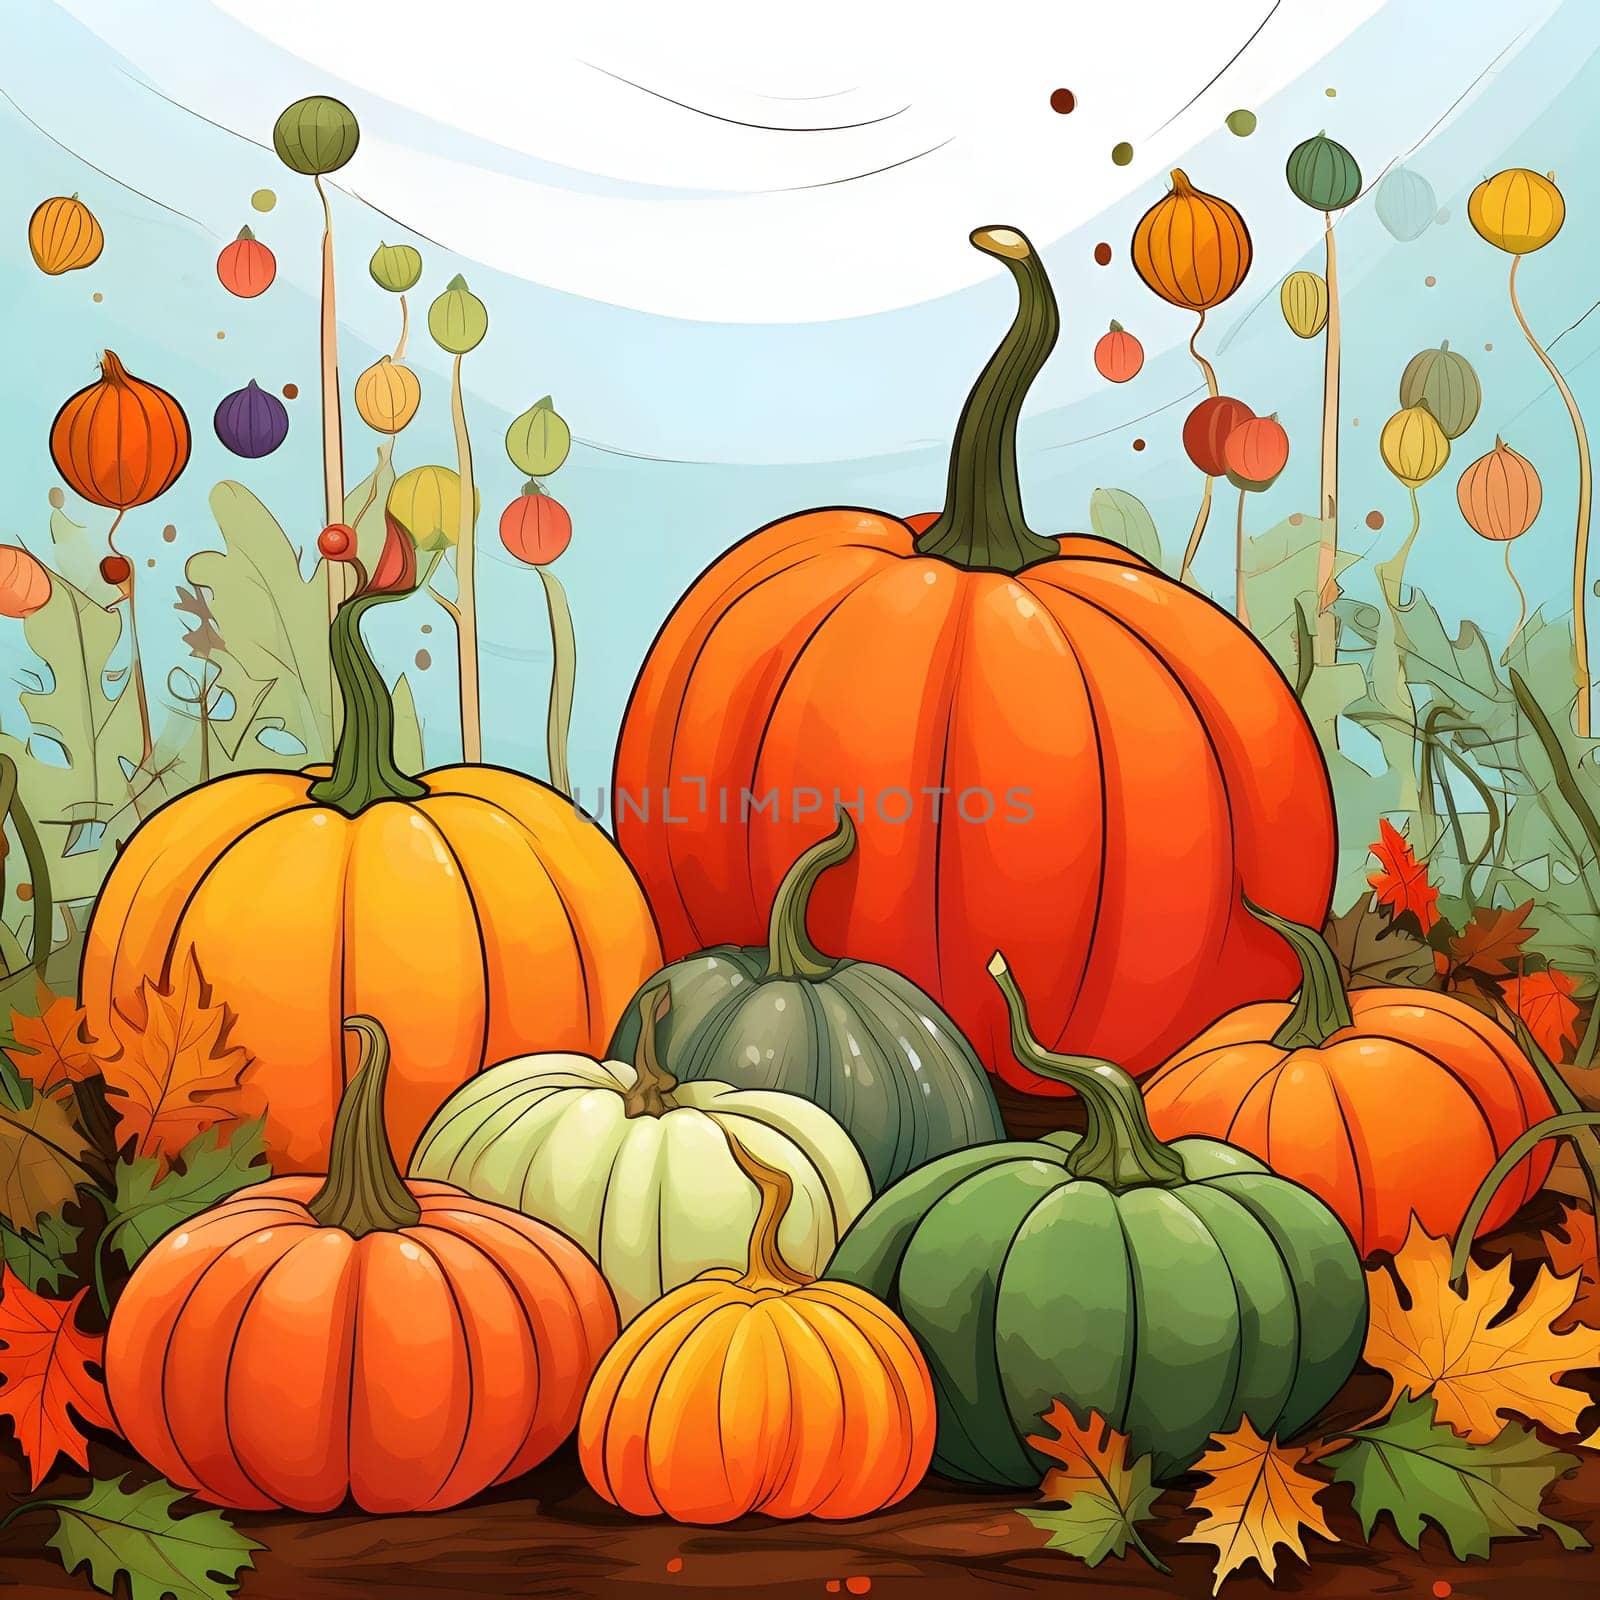 Illustrated pumpkins autumn leaves background, New Year lanterns. Pumpkin as a thanksgiving dish for the harvest. An atmosphere of joy and celebration.